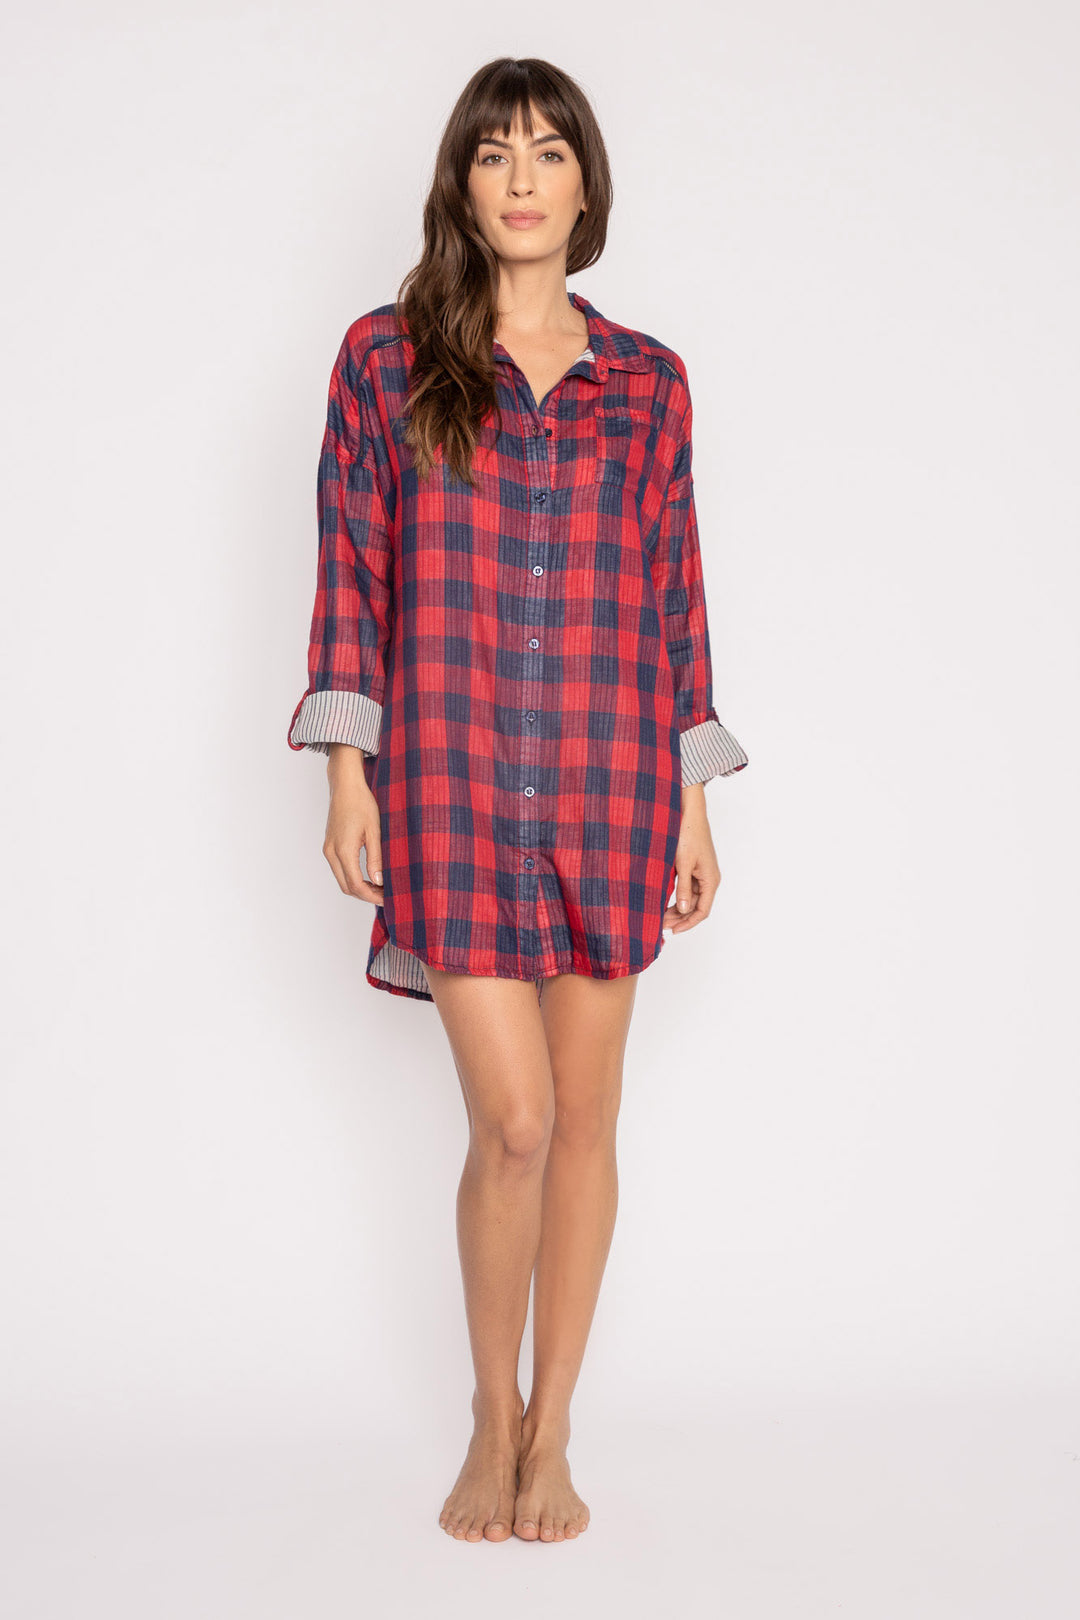 Navy & red plaid nightshirt with mini button front. Soft woven, light fabric. Roll-up sleeves. (7249830150244)